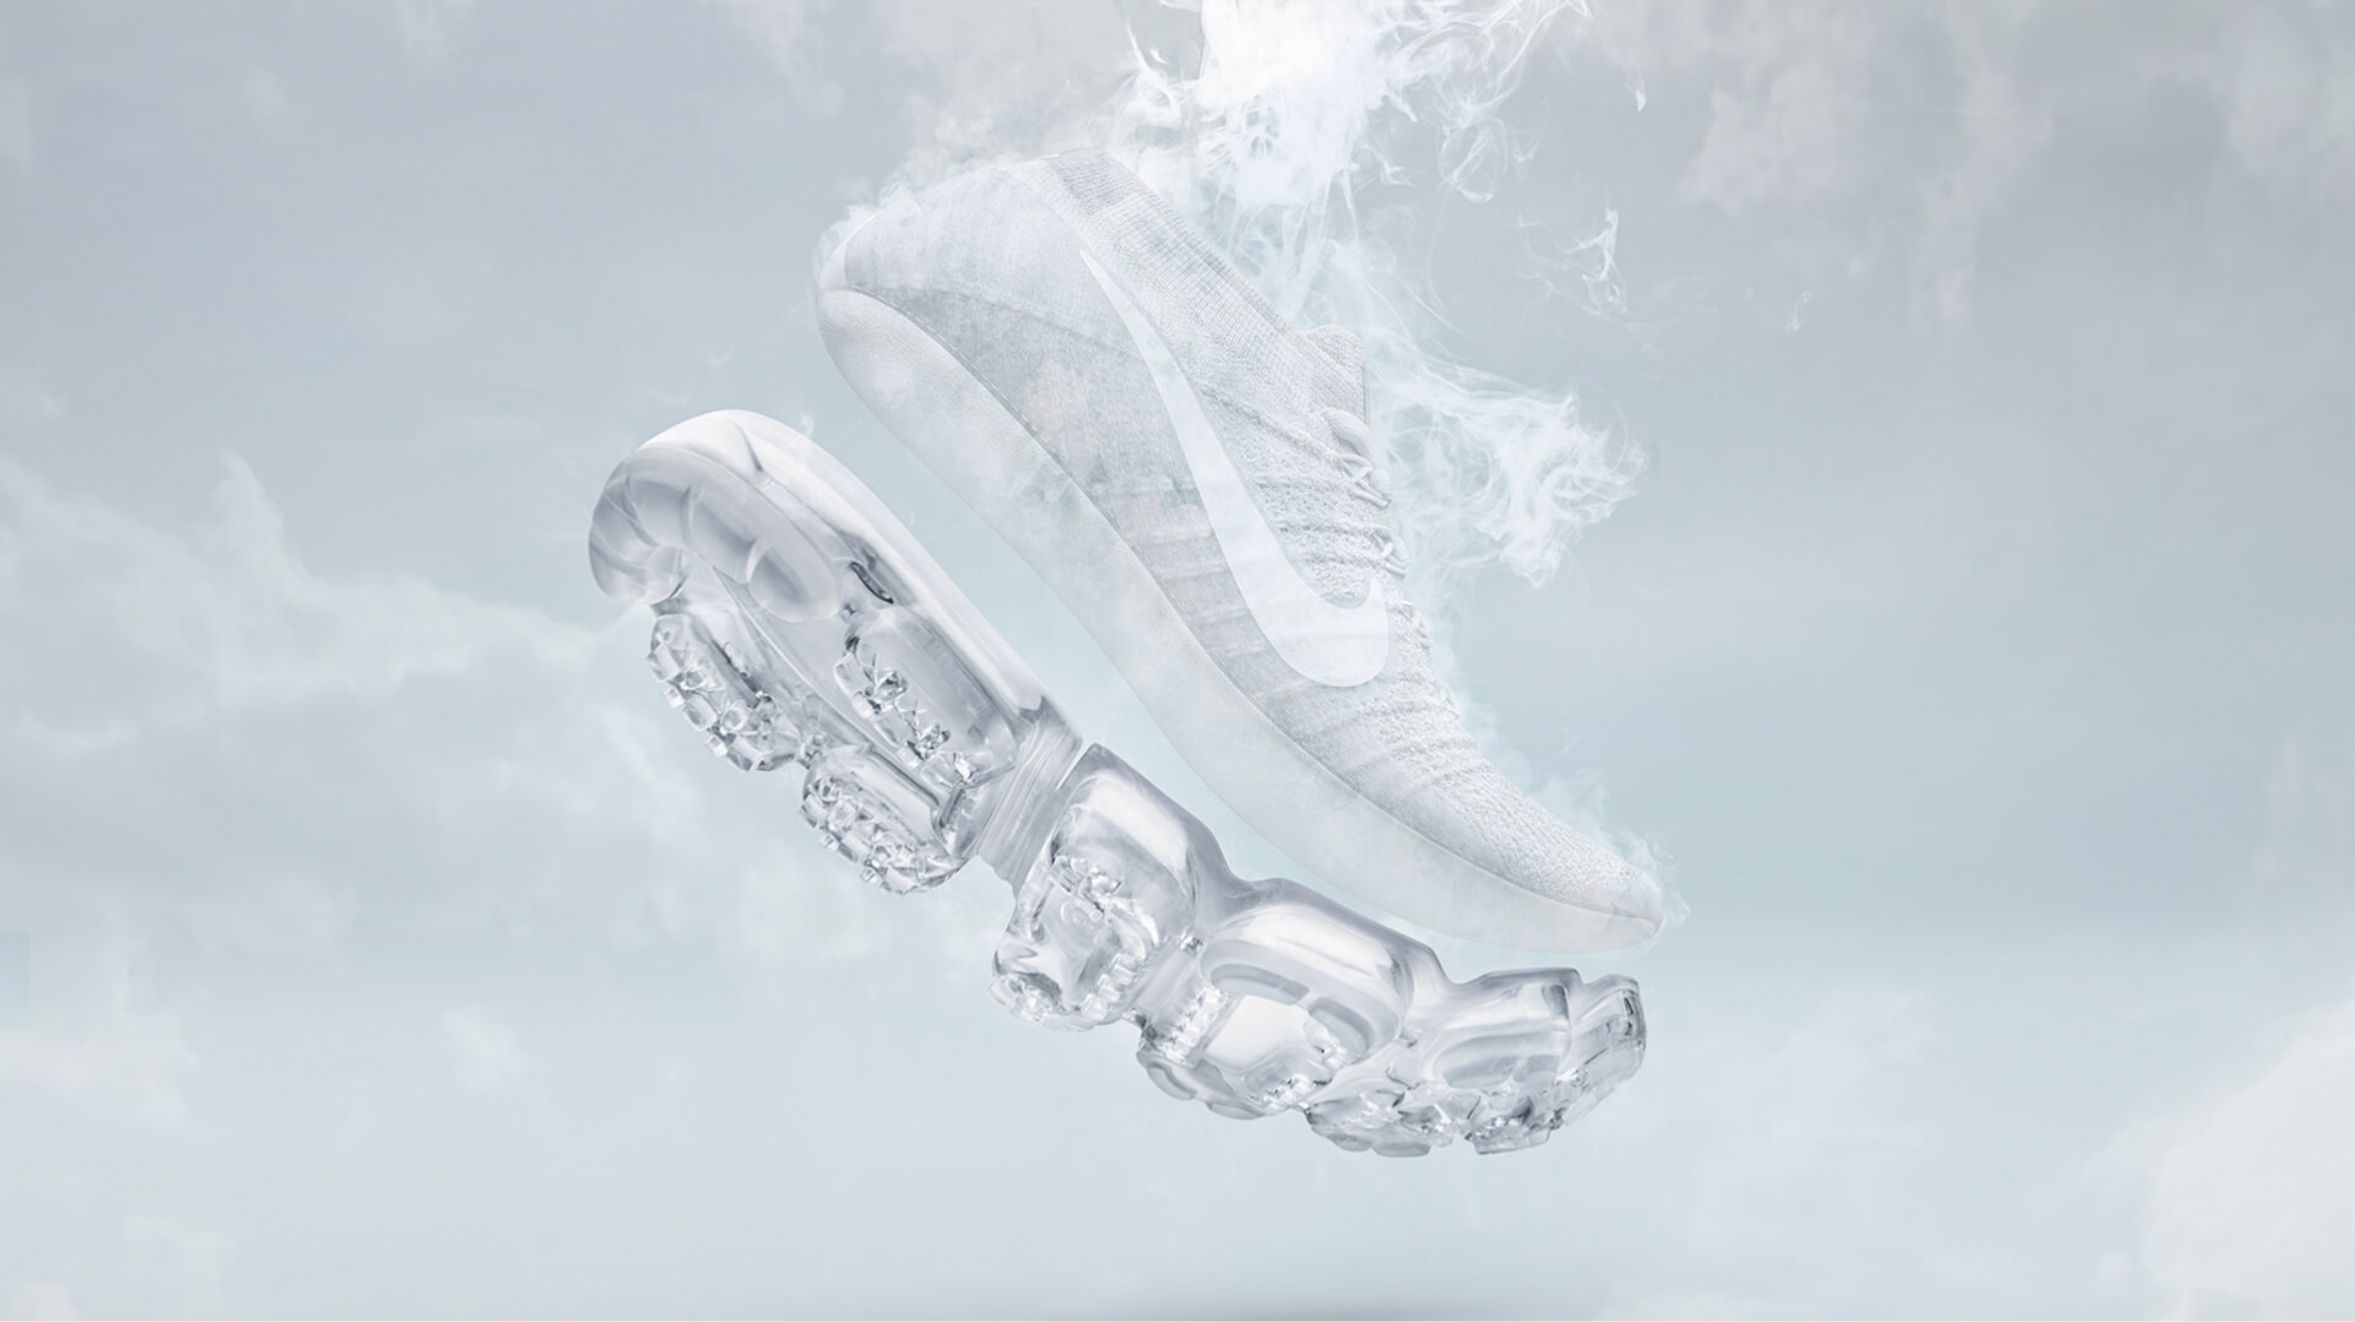 nike air running shoe render with air sole detached and vapor surrounding shoe